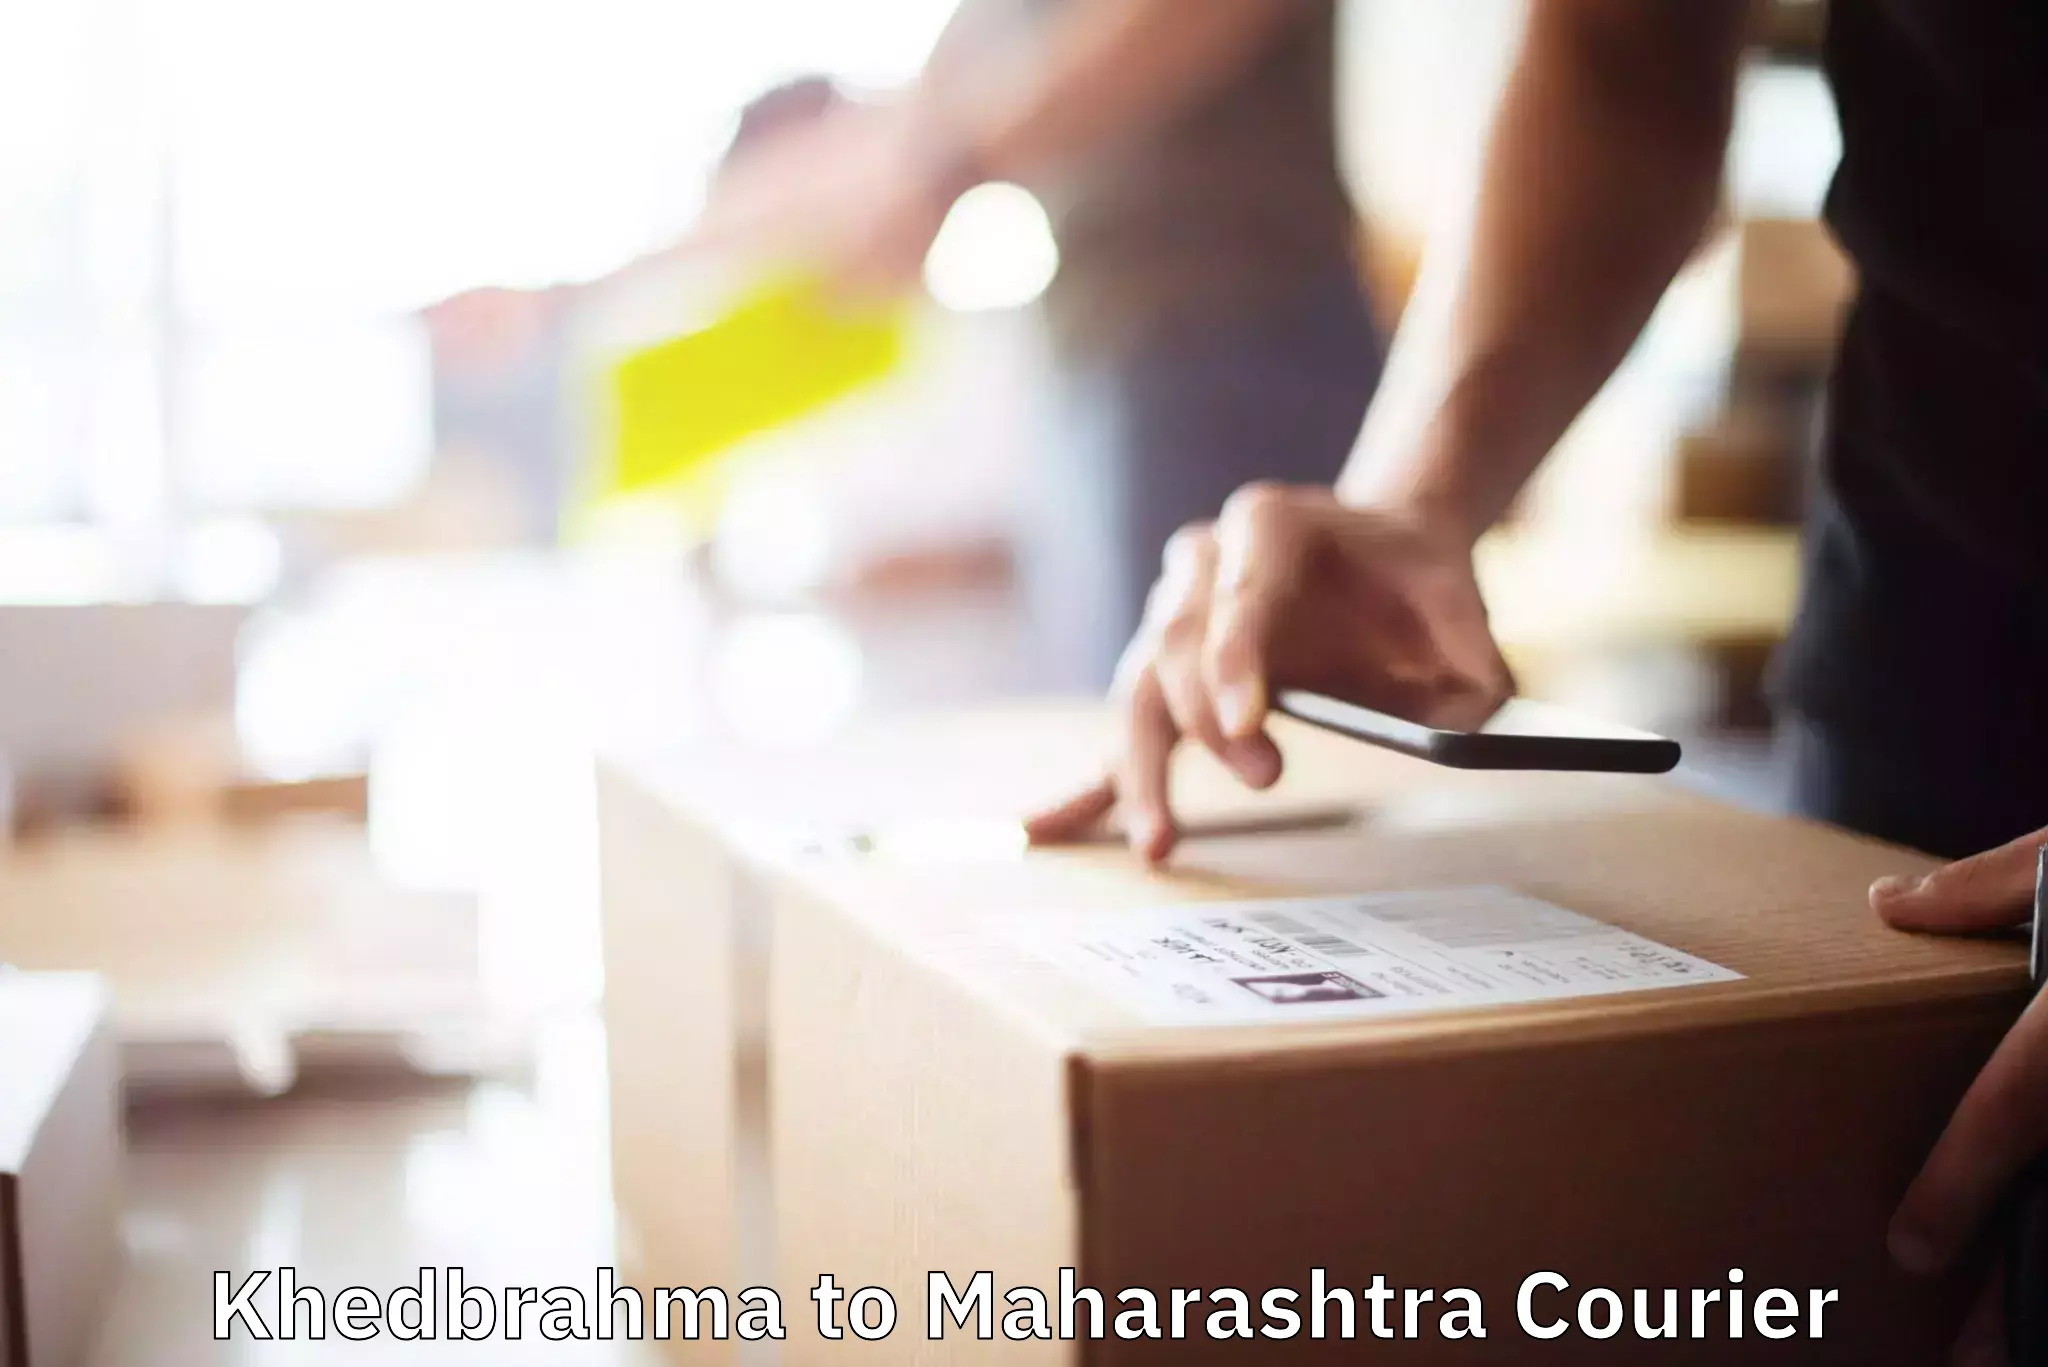 Furniture relocation services in Khedbrahma to Maharashtra